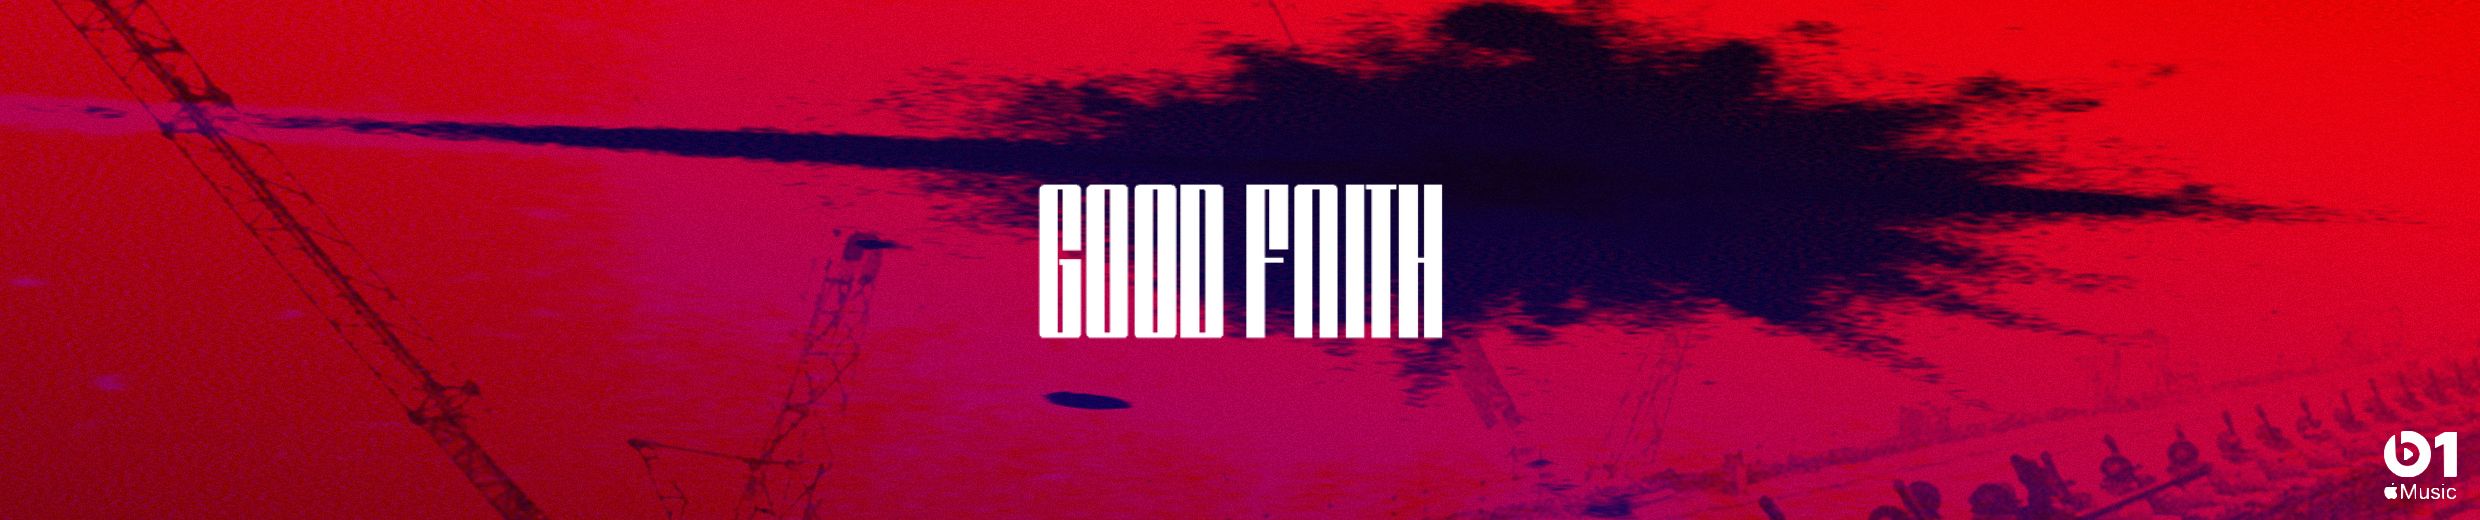 Stream Good Faith Radio - Repost Account music | Listen to songs, albums,  playlists for free on SoundCloud